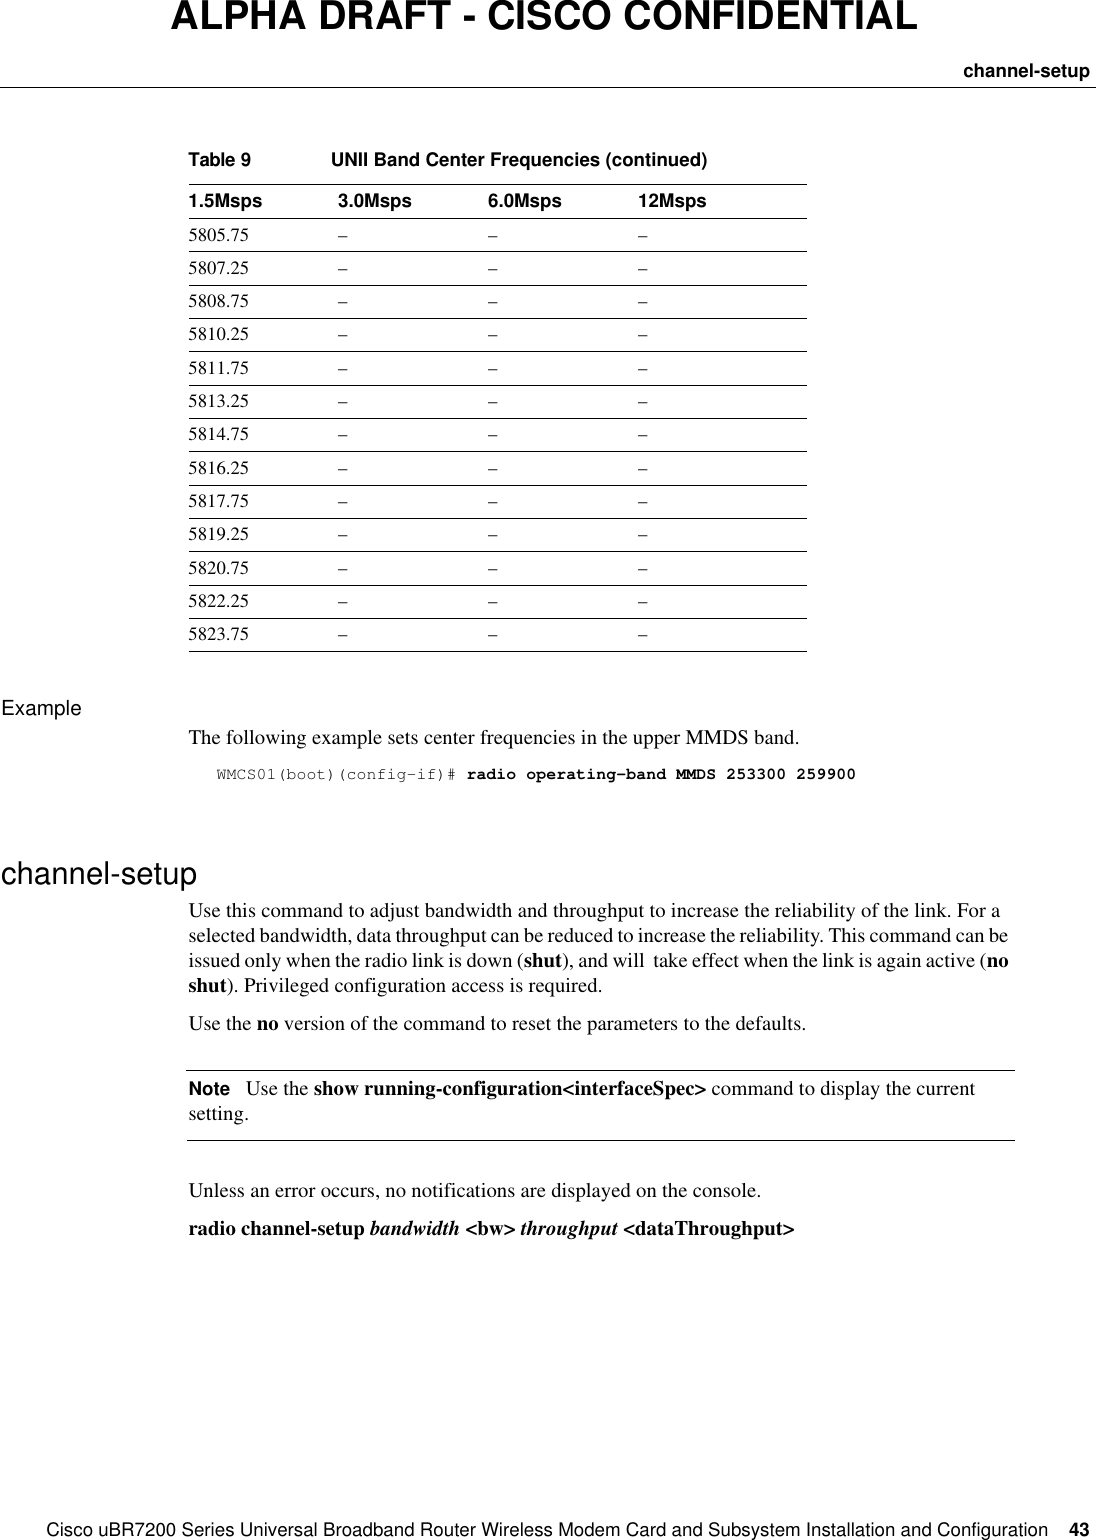 CiscouBR7200 Series Universal Broadband Router Wireless Modem Card and Subsystem Installation and Configuration  43channel-setupALPHA DRAFT - CISCO CONFIDENTIALExampleThe following example sets center frequencies in the upper MMDS band.WMCS01(boot)(config-if)# radio operating-band MMDS 253300 259900channel-setupUse this command to adjust bandwidth and throughput to increase the reliability of the link. For a selected bandwidth, data throughput can be reduced to increase the reliability. This command can be issued only when the radio link is down (shut), and will  take effect when the link is again active (no shut). Privileged configuration access is required.Use the no version of the command to reset the parameters to the defaults. NoteUse the show running-configuration&lt;interfaceSpec&gt; command to display the current setting. Unless an error occurs, no notifications are displayed on the console. radio channel-setup bandwidth &lt;bw&gt; throughput &lt;dataThroughput&gt;5805.75 –––5807.25 –––5808.75 –––5810.25 –––5811.75 –––5813.25 –––5814.75 –––5816.25 –––5817.75 –––5819.25 –––5820.75 –––5822.25 –––5823.75 –––Table9UNII Band Center Frequencies (continued)1.5Msps  3.0Msps 6.0Msps 12Msps